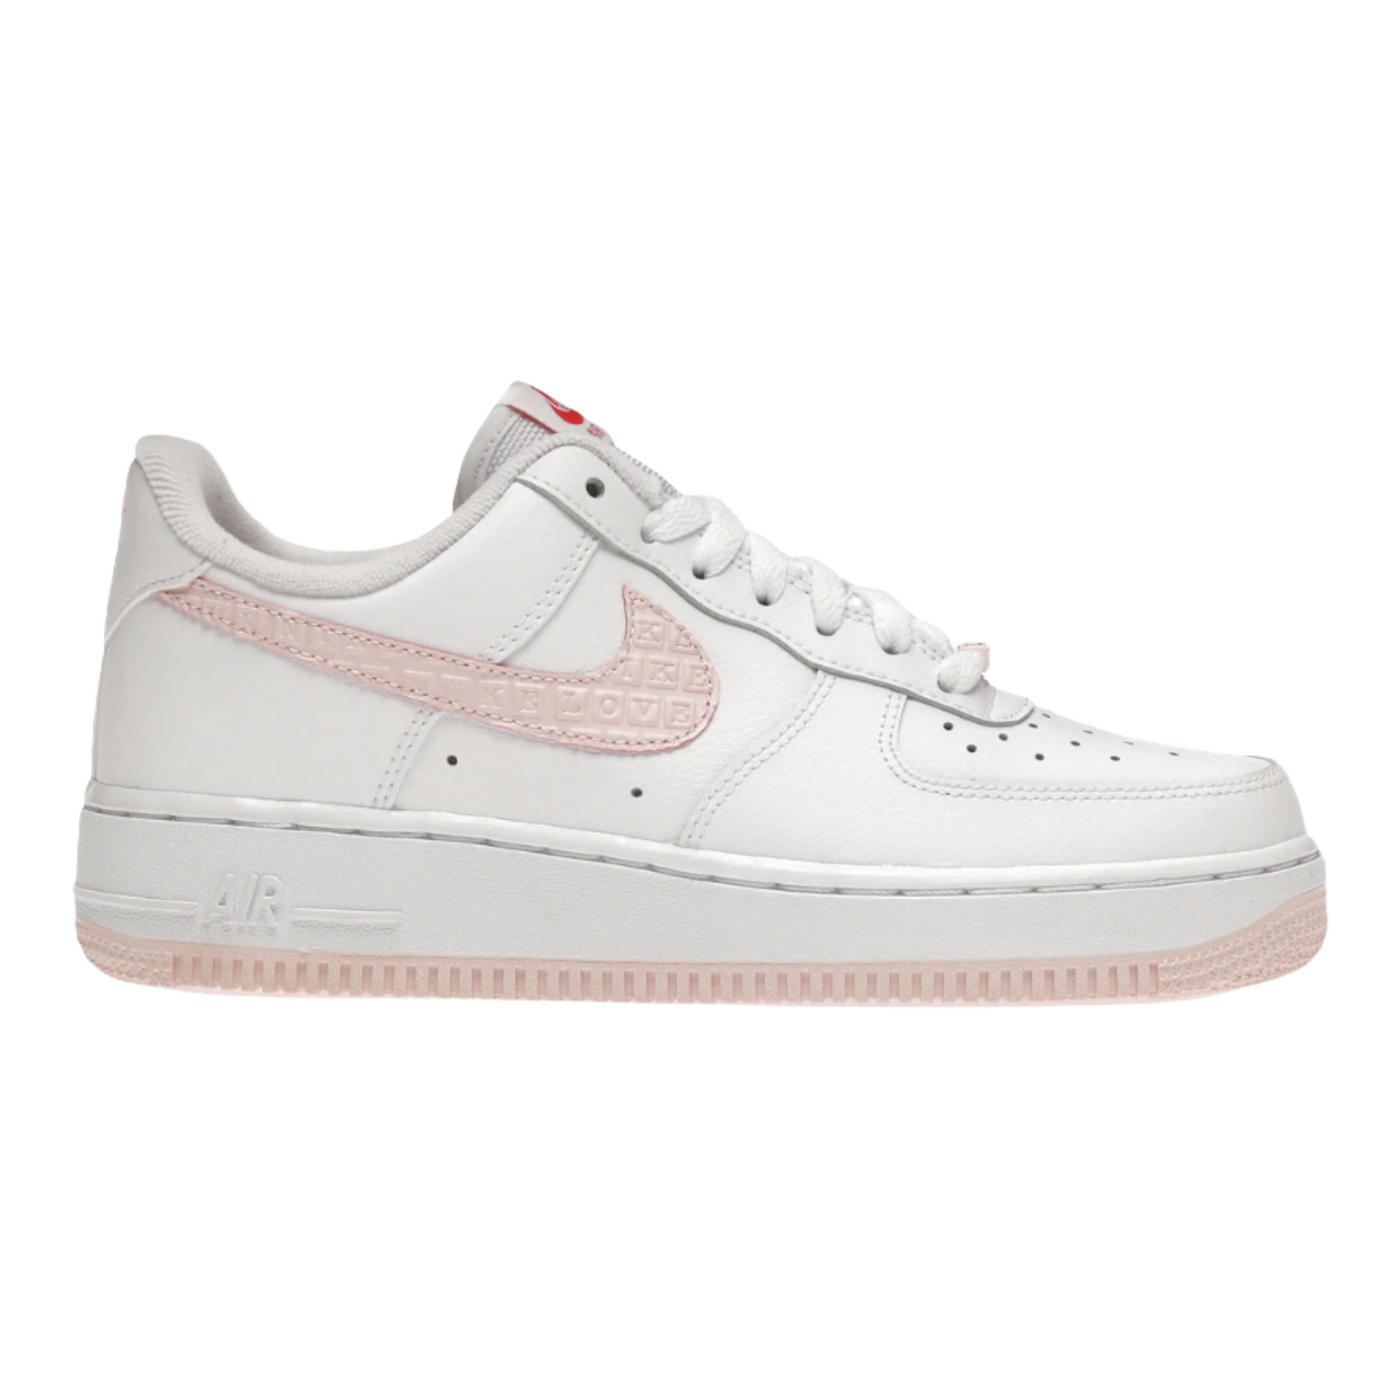 NIKE AIR FORCE 1 LOW WMNS VAENTINE'S DAY 2022